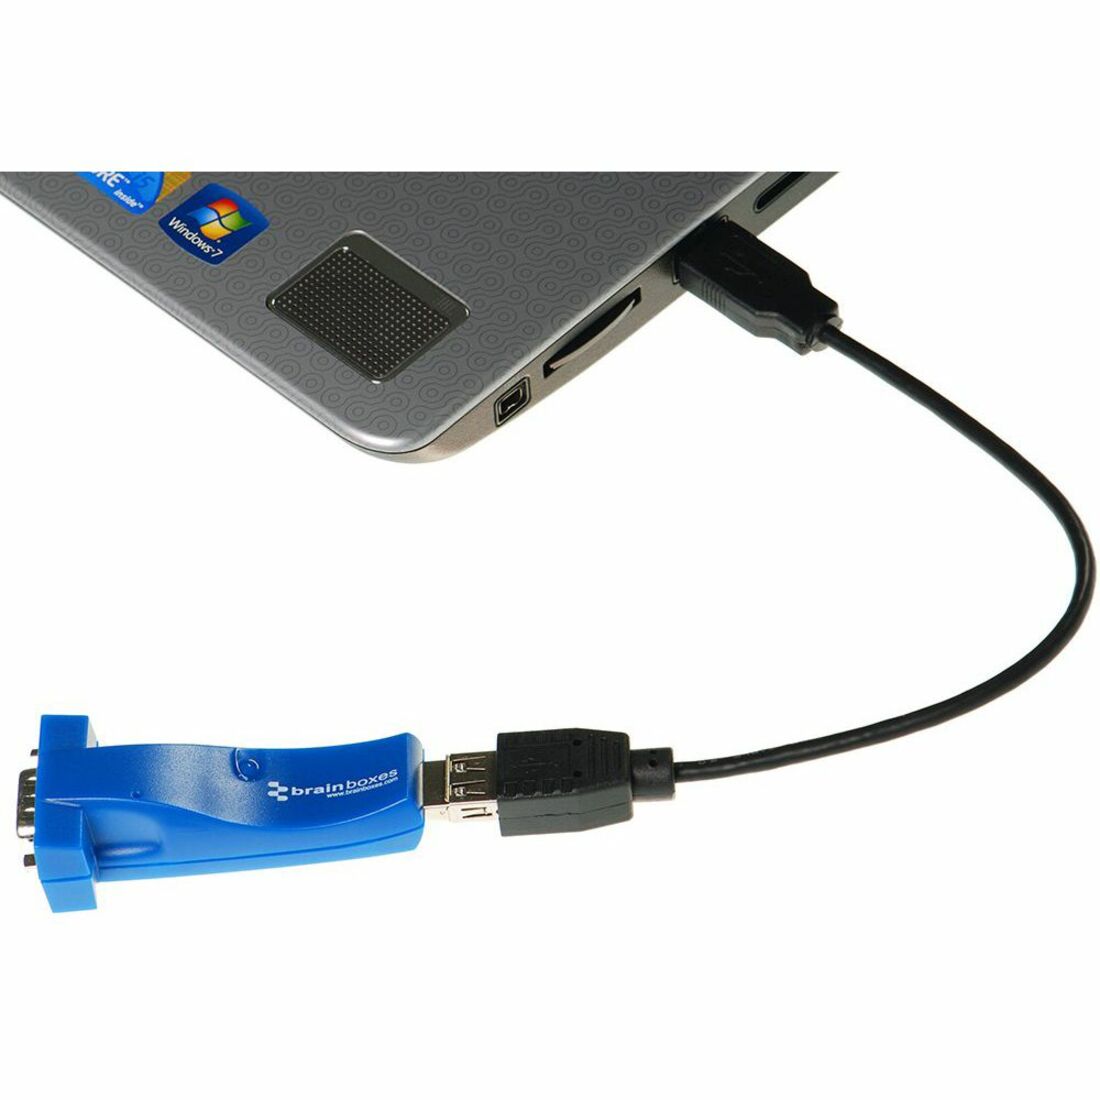 Brainboxes US-101-X100C 1 Port RS232 USB to Serial Adapter, Data Transfer Adapter